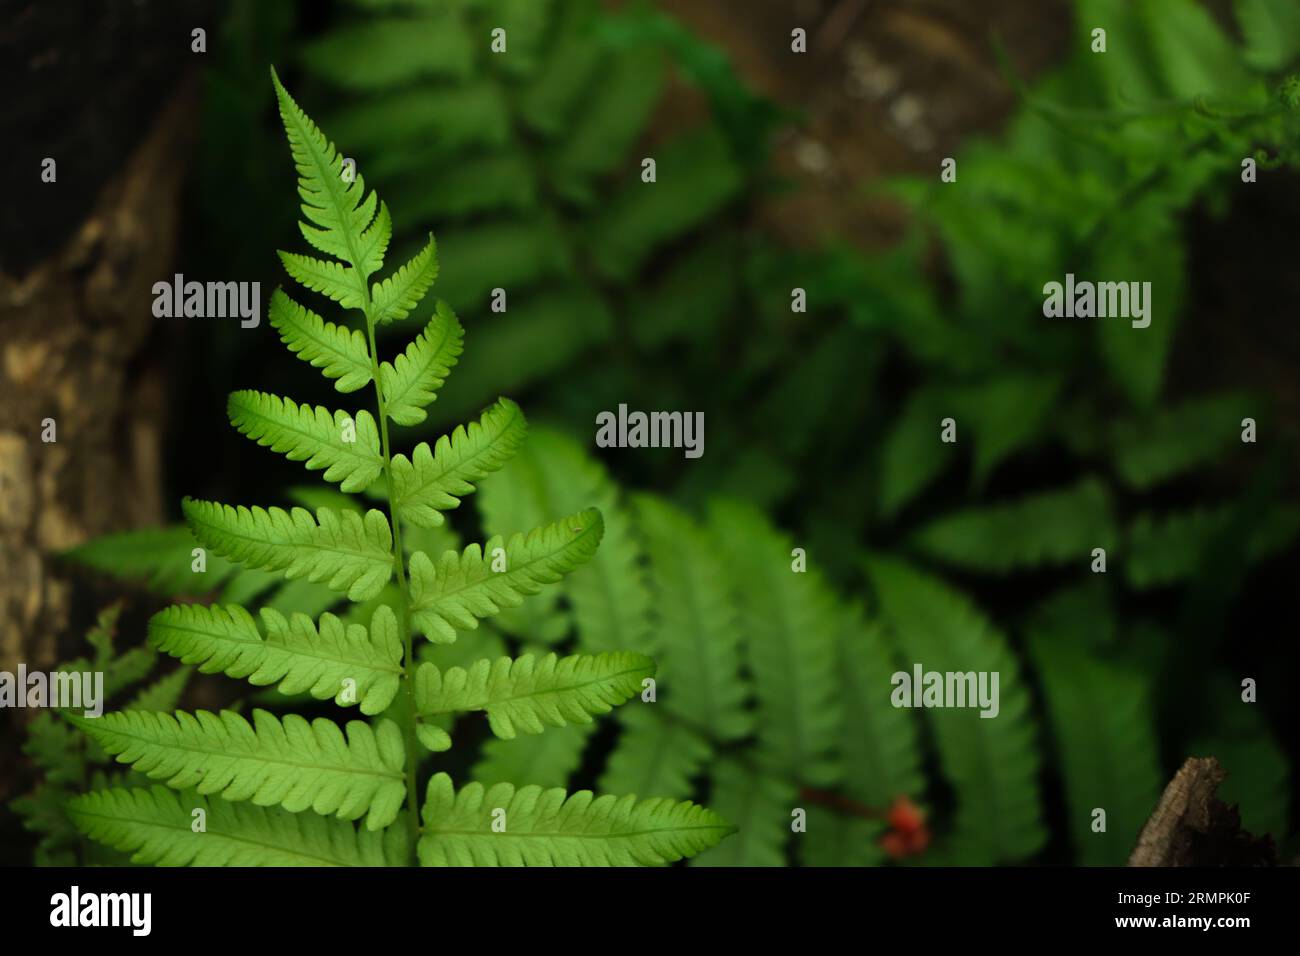 Closeup of fern leaf in forest Stock Photo